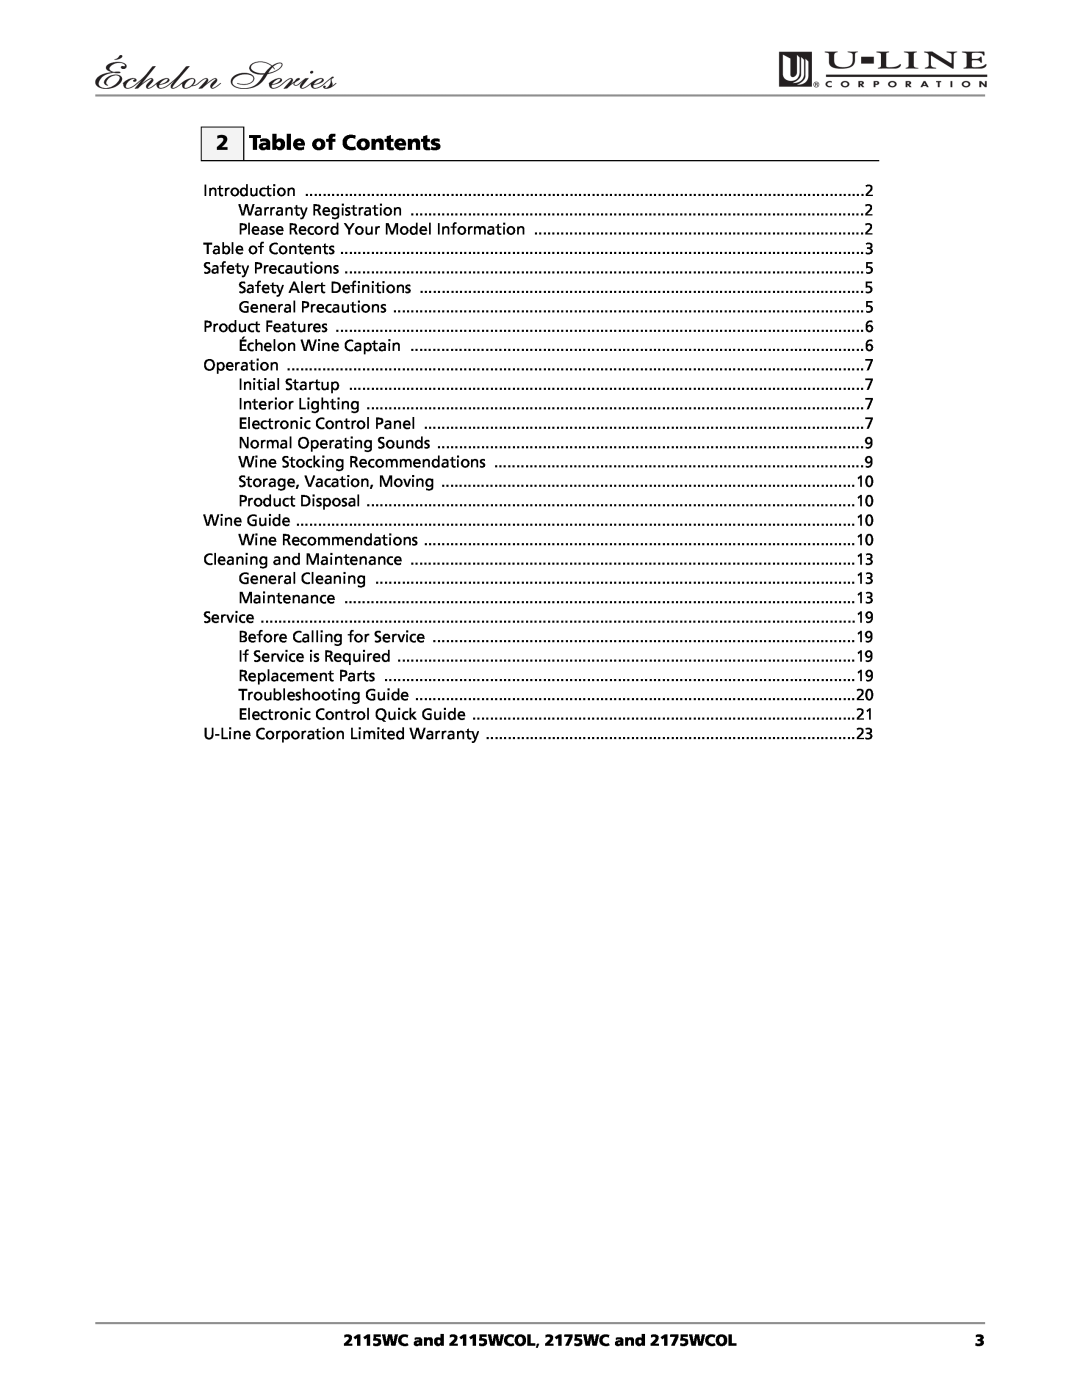 U-Line manual Table of Contents, 2115WC and 2115WCOL, 2175WC and 2175WCOL 